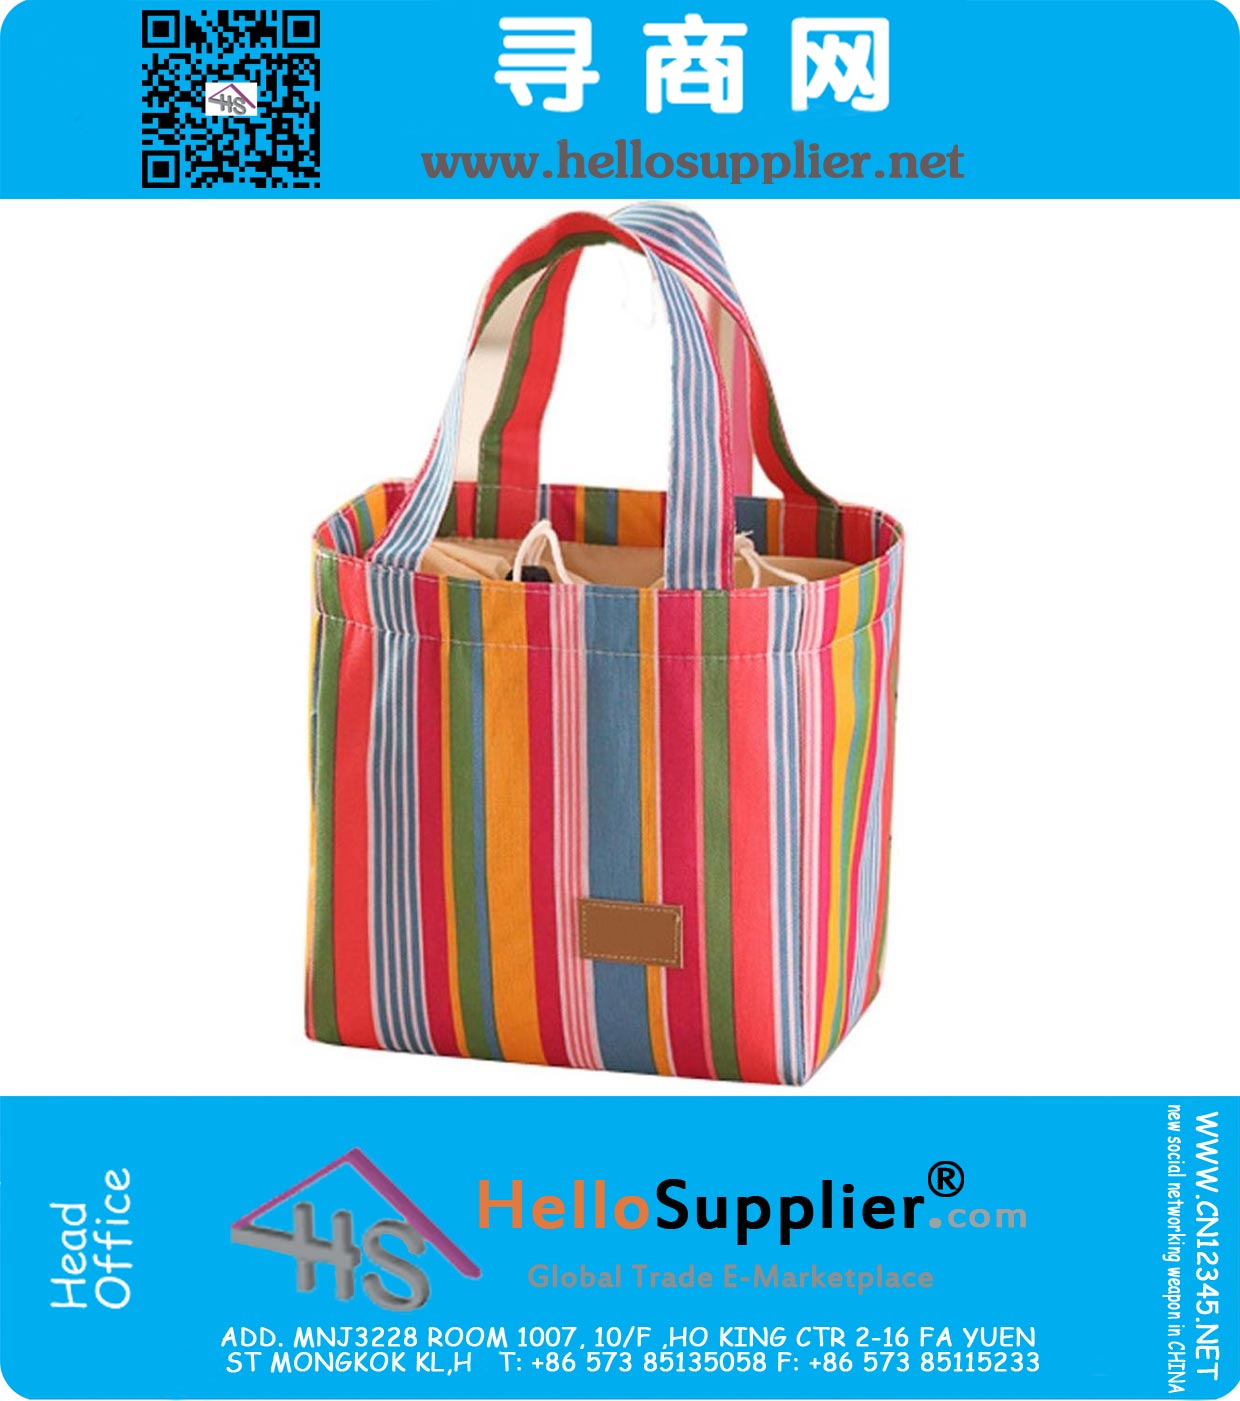 Lunch Bags,Lunch Tote Bag Lunch Bag Grocery Bags Travel Picnic Convenient Portable Lunch Packet, Colorful Stripe Inner Aluminum Foil Lunch Bag for Women Men Girls Boys